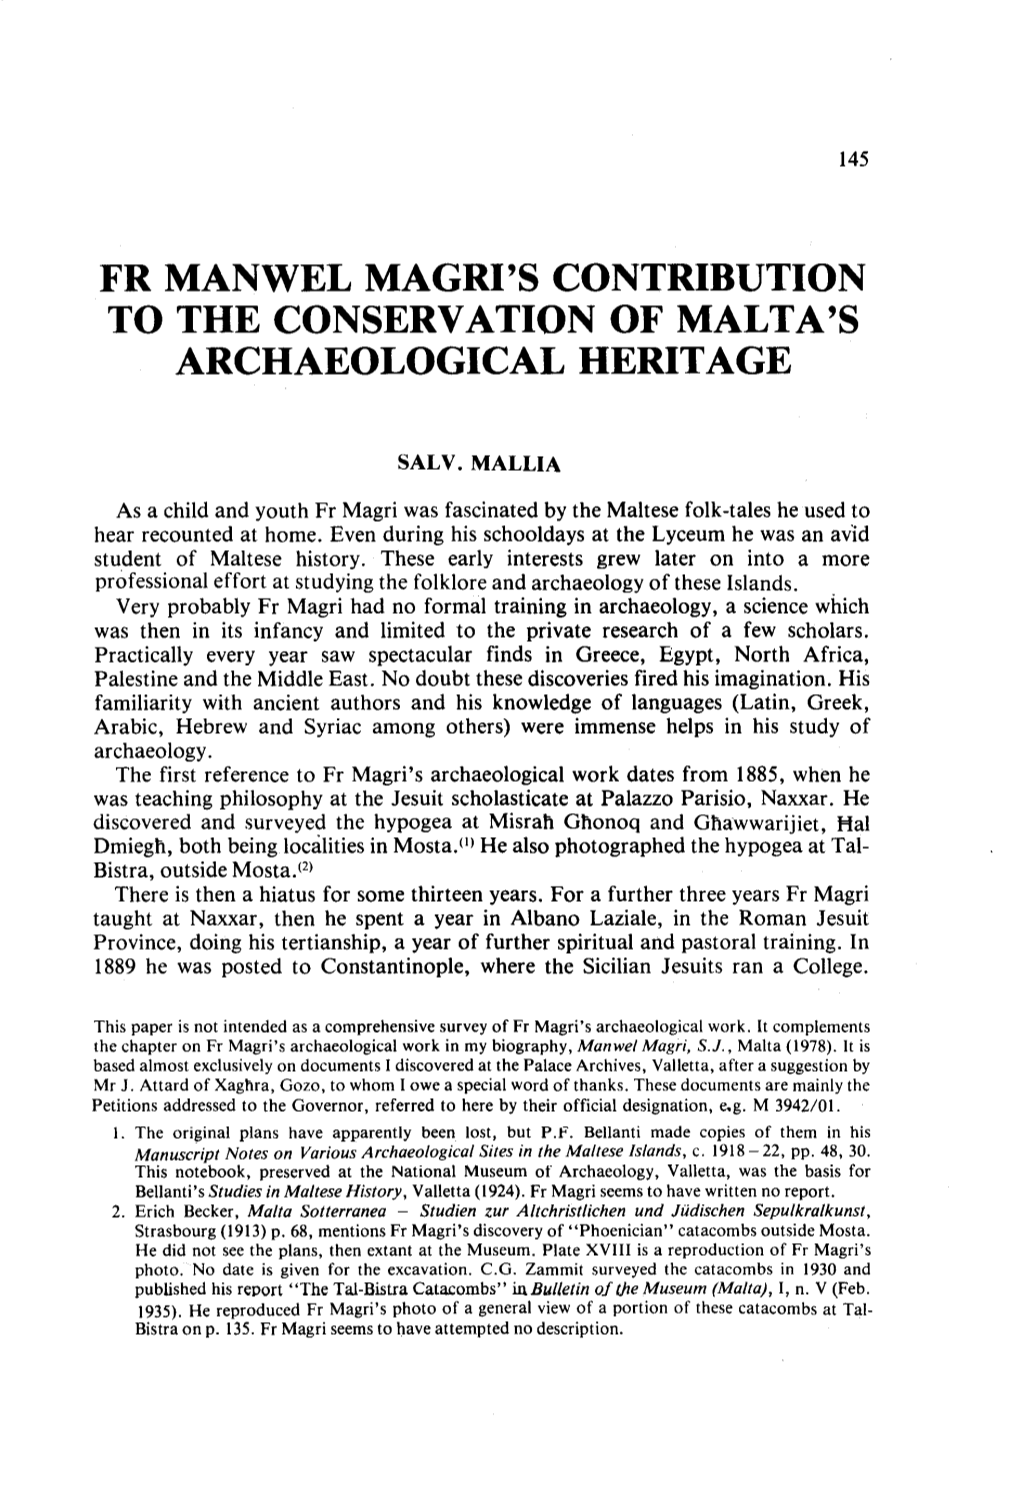 Fr Manwel Magri's Contribution to the Conservation of Malta's Archaeological Heritage